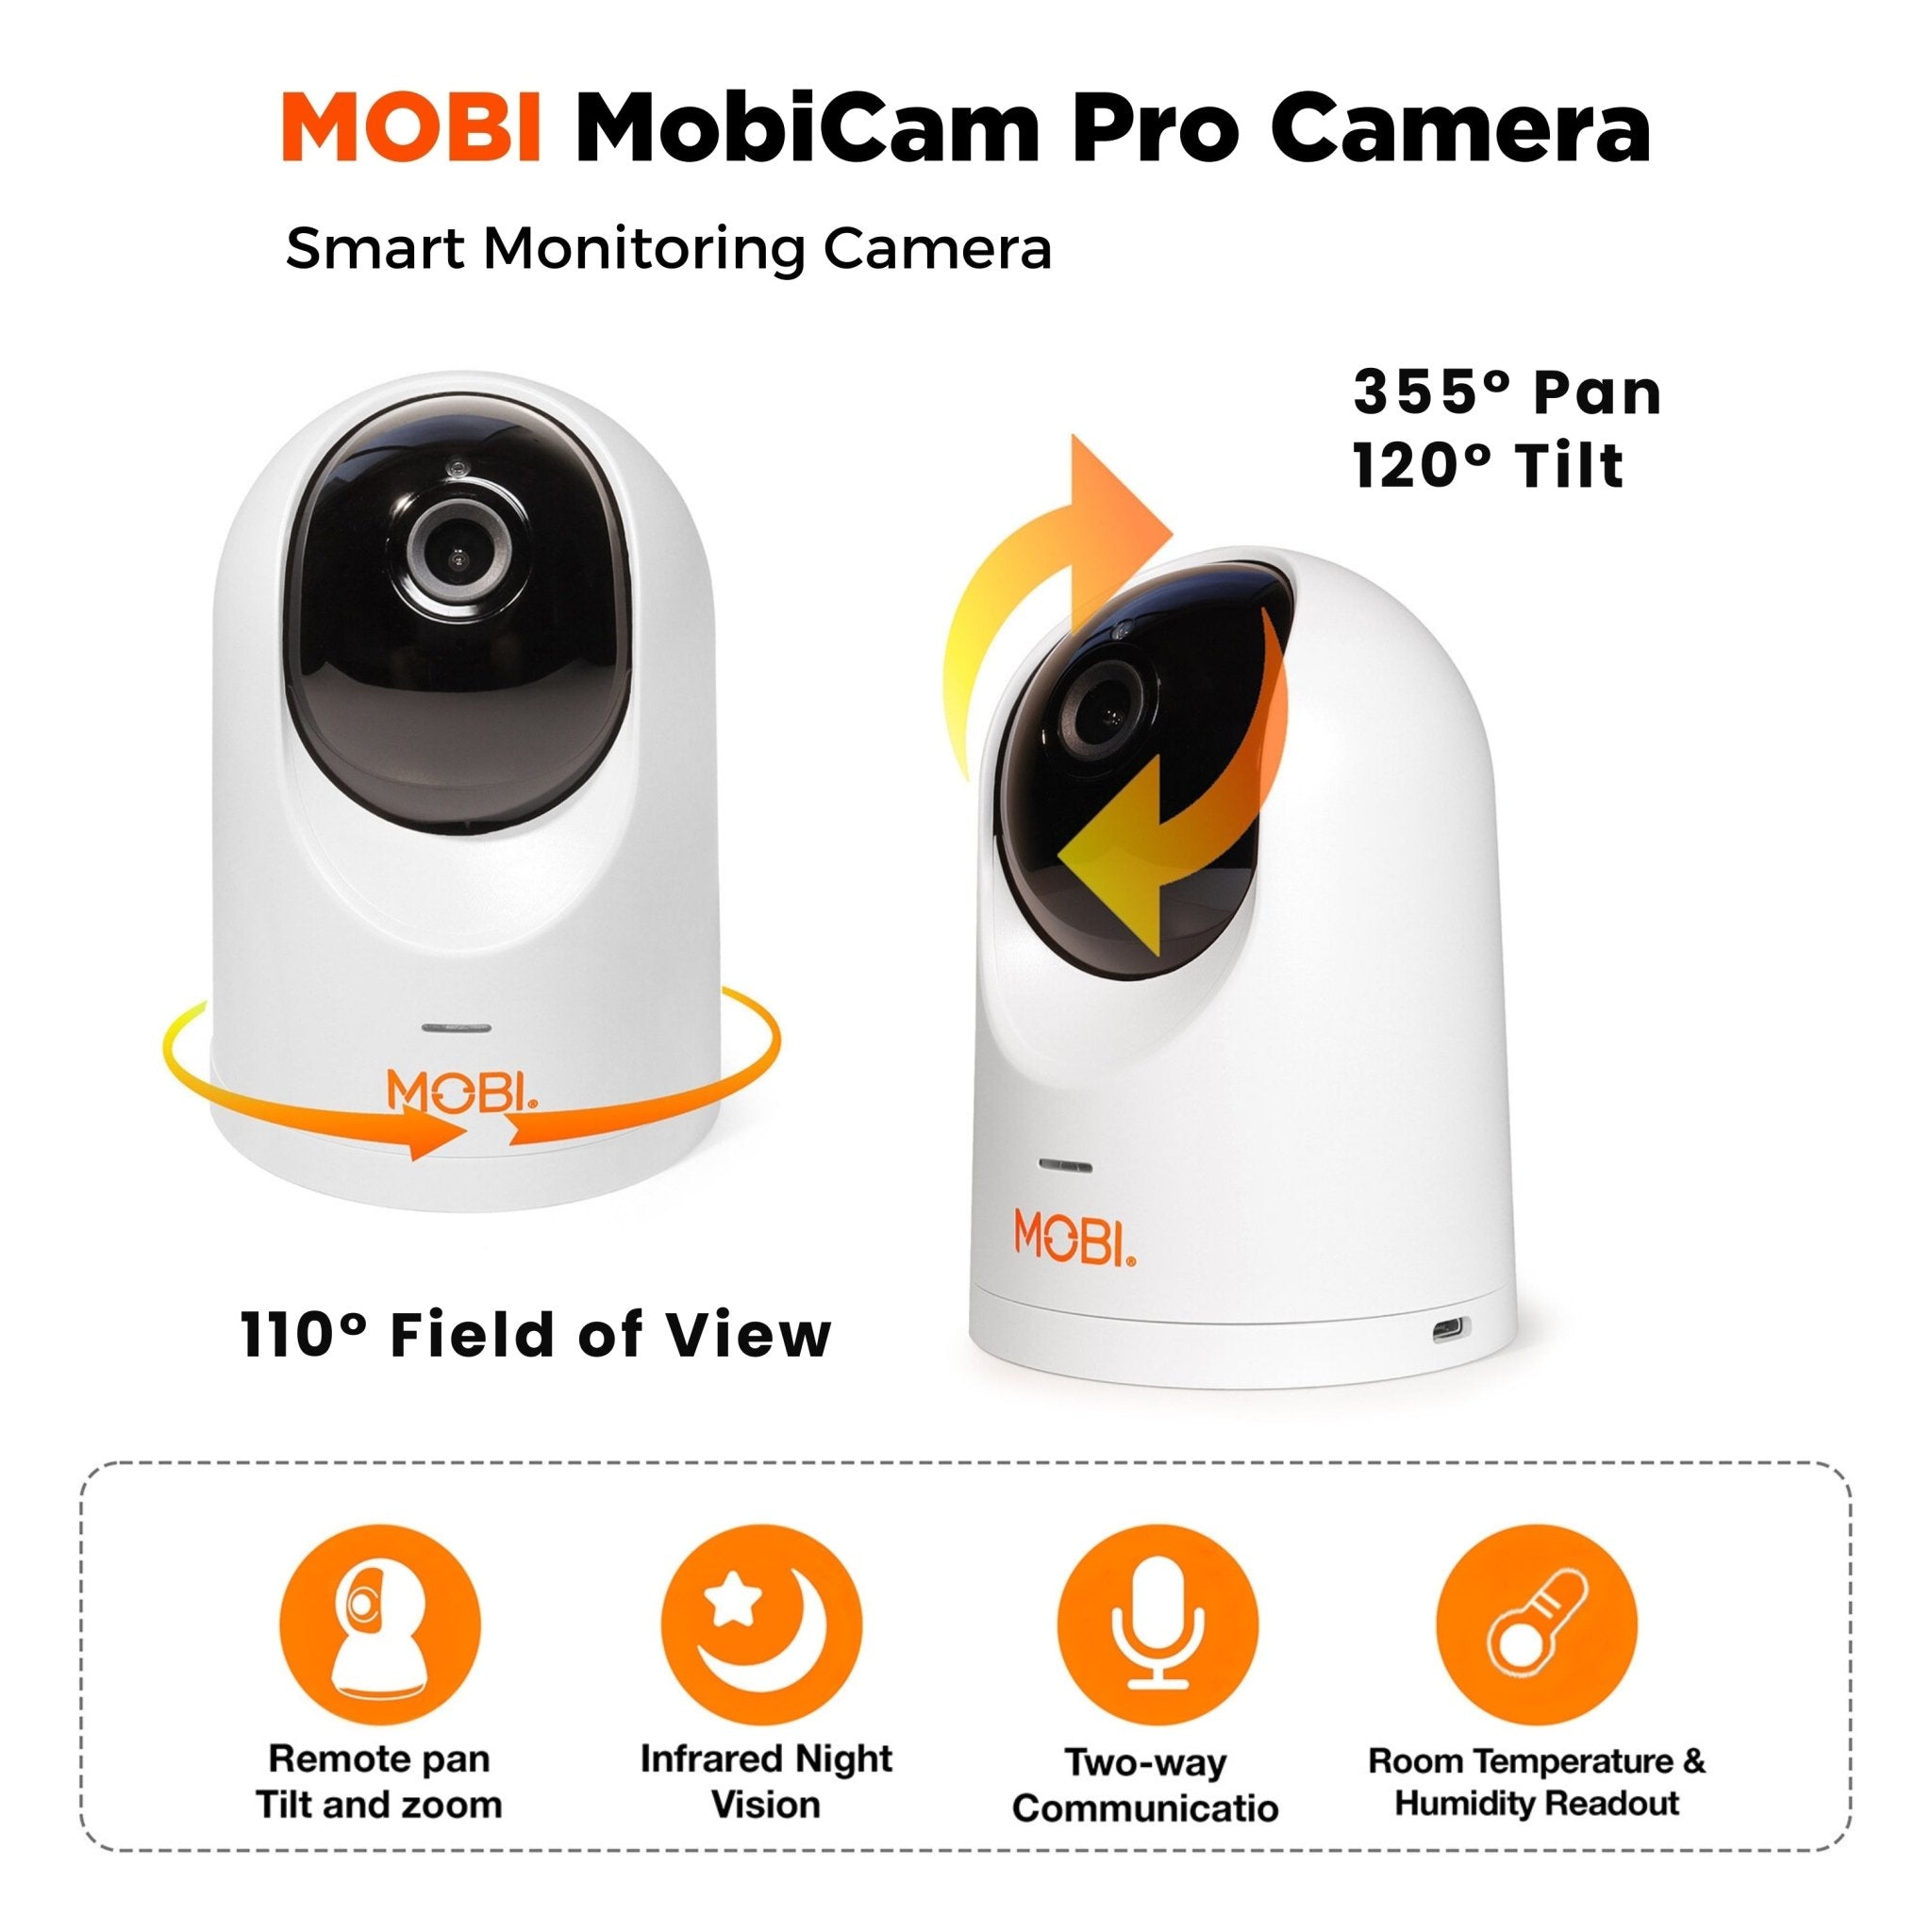 MobiCam PRO Intelligent Home Monitoring Camera: Full HD, Pan & Tilt, Color Night Vision, Motion Tracking, Temp & Humidity Readings. Supports Cloud & SD Storage, Smart App Compatible - MOBI USA